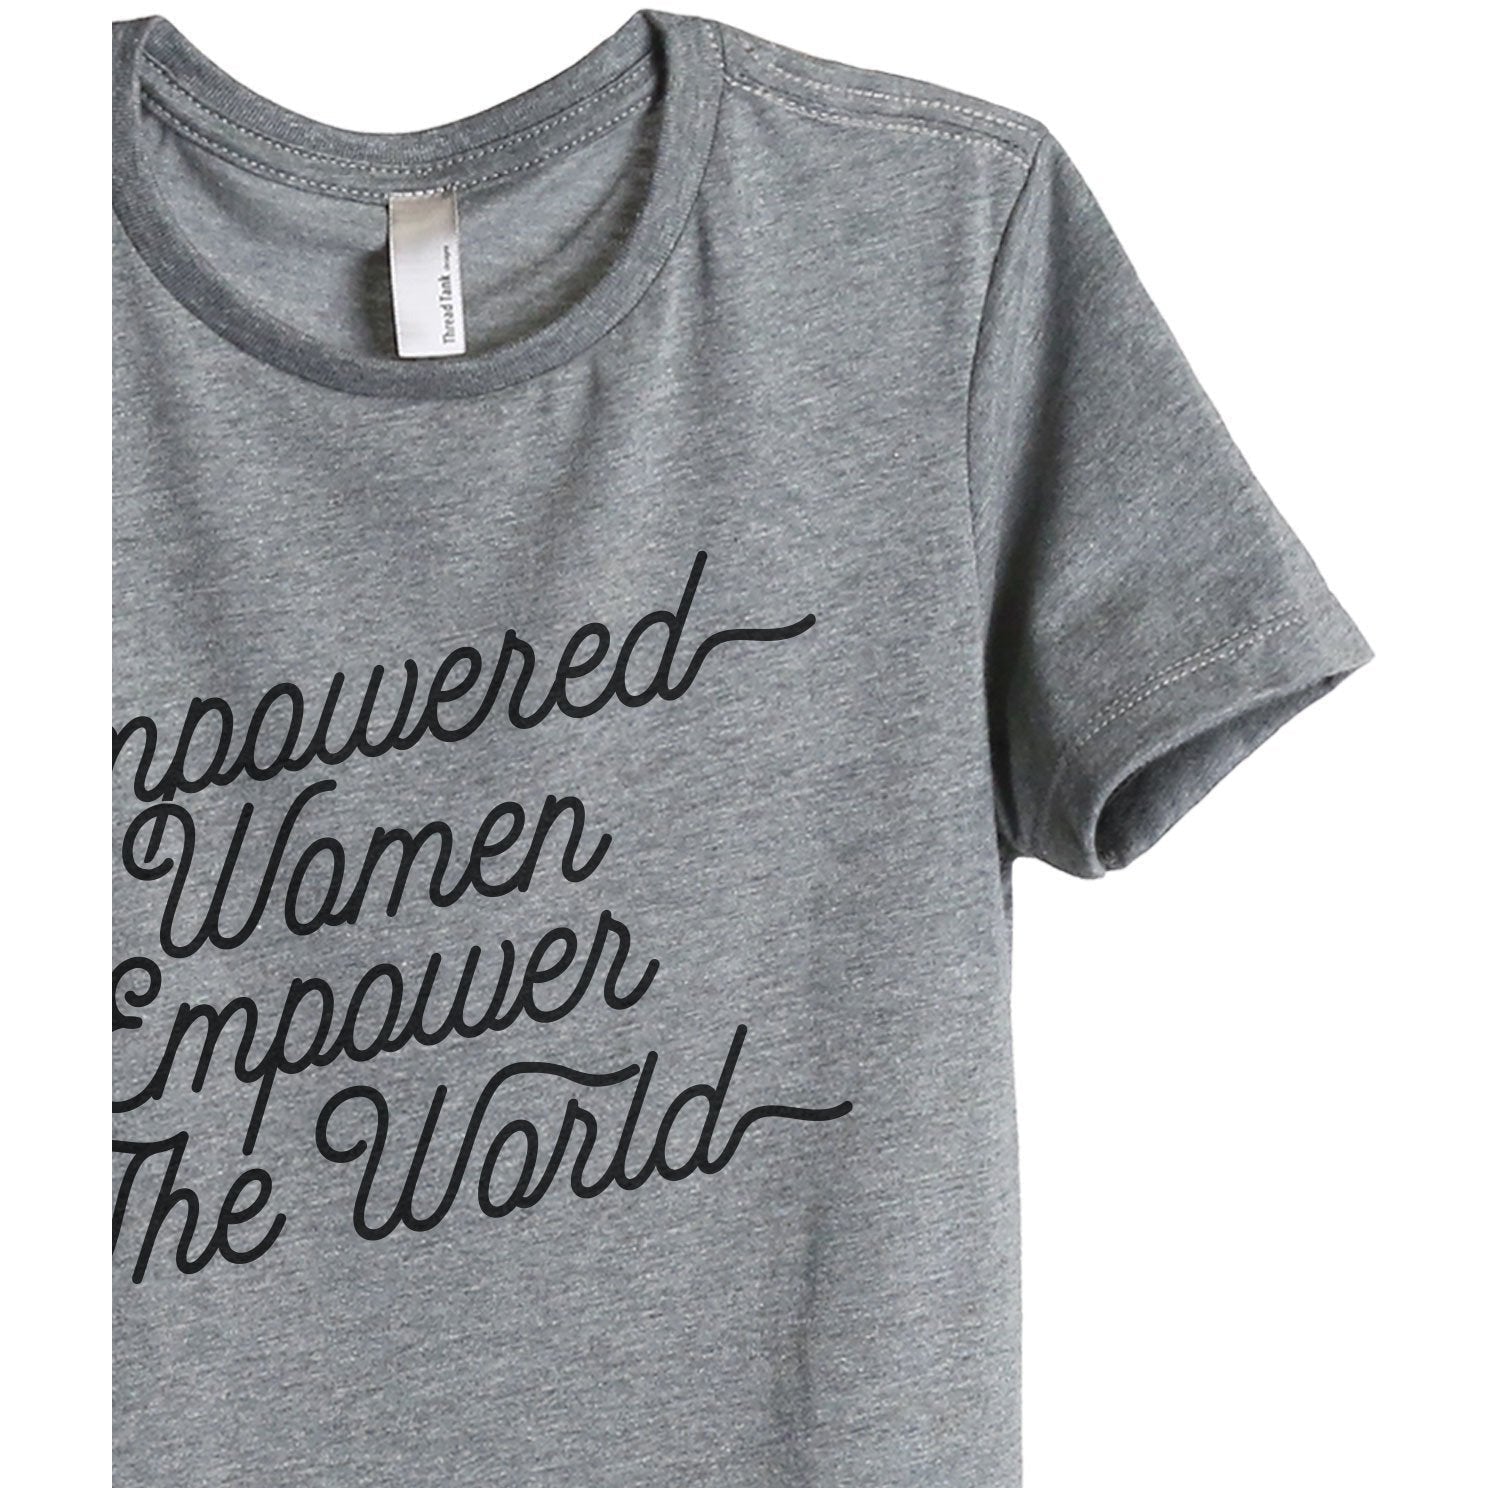 Empowered Women Empower The World Women's Relaxed Crewneck T-Shirt Top Tee Heather Grey Zoom Details
